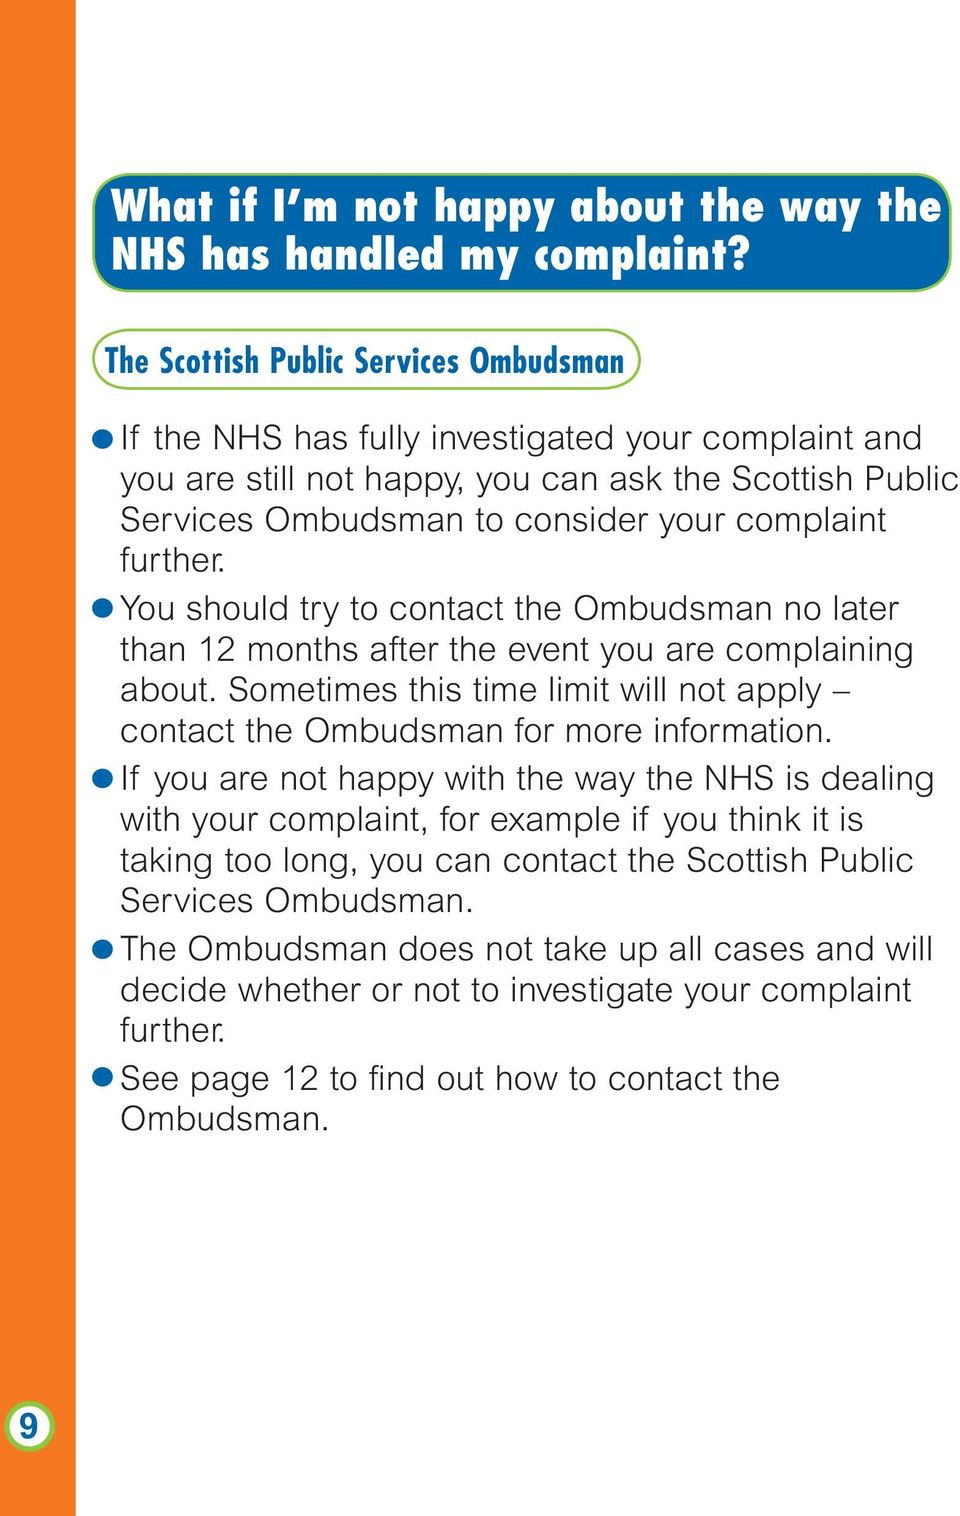 further. You should try to contact the Ombudsman no later than 12 months after the event you are complaining about. Sometimes this time limit will not apply contact the Ombudsman for more information.